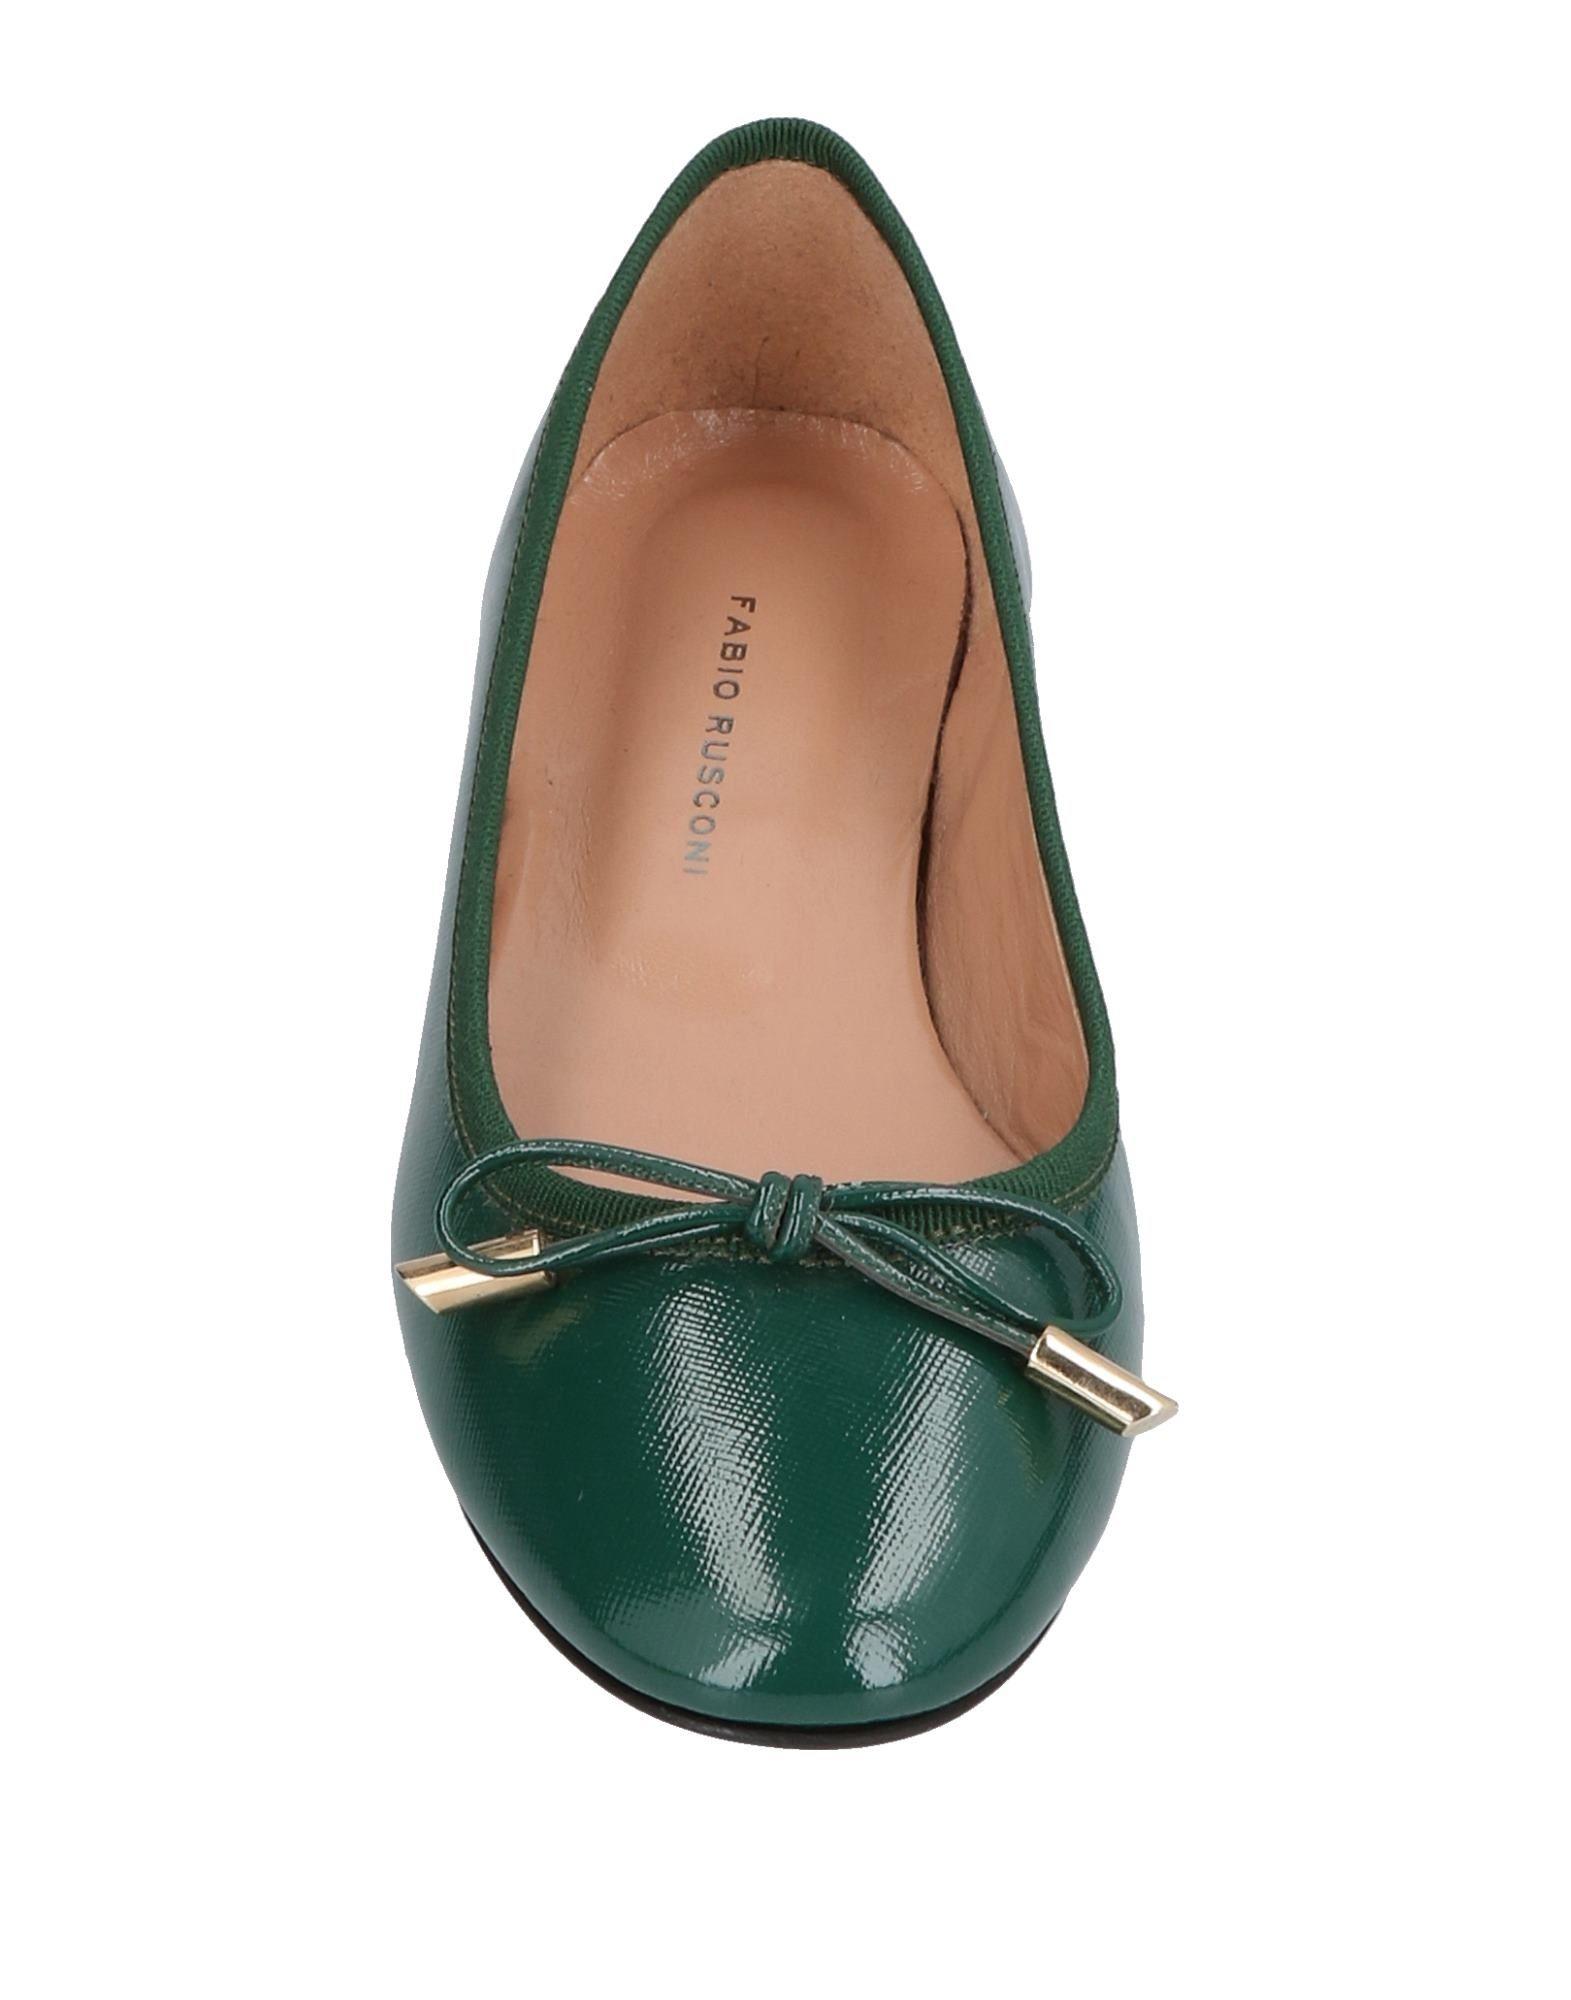 Fabio Rusconi Leather Ballet Flats in Green - Lyst